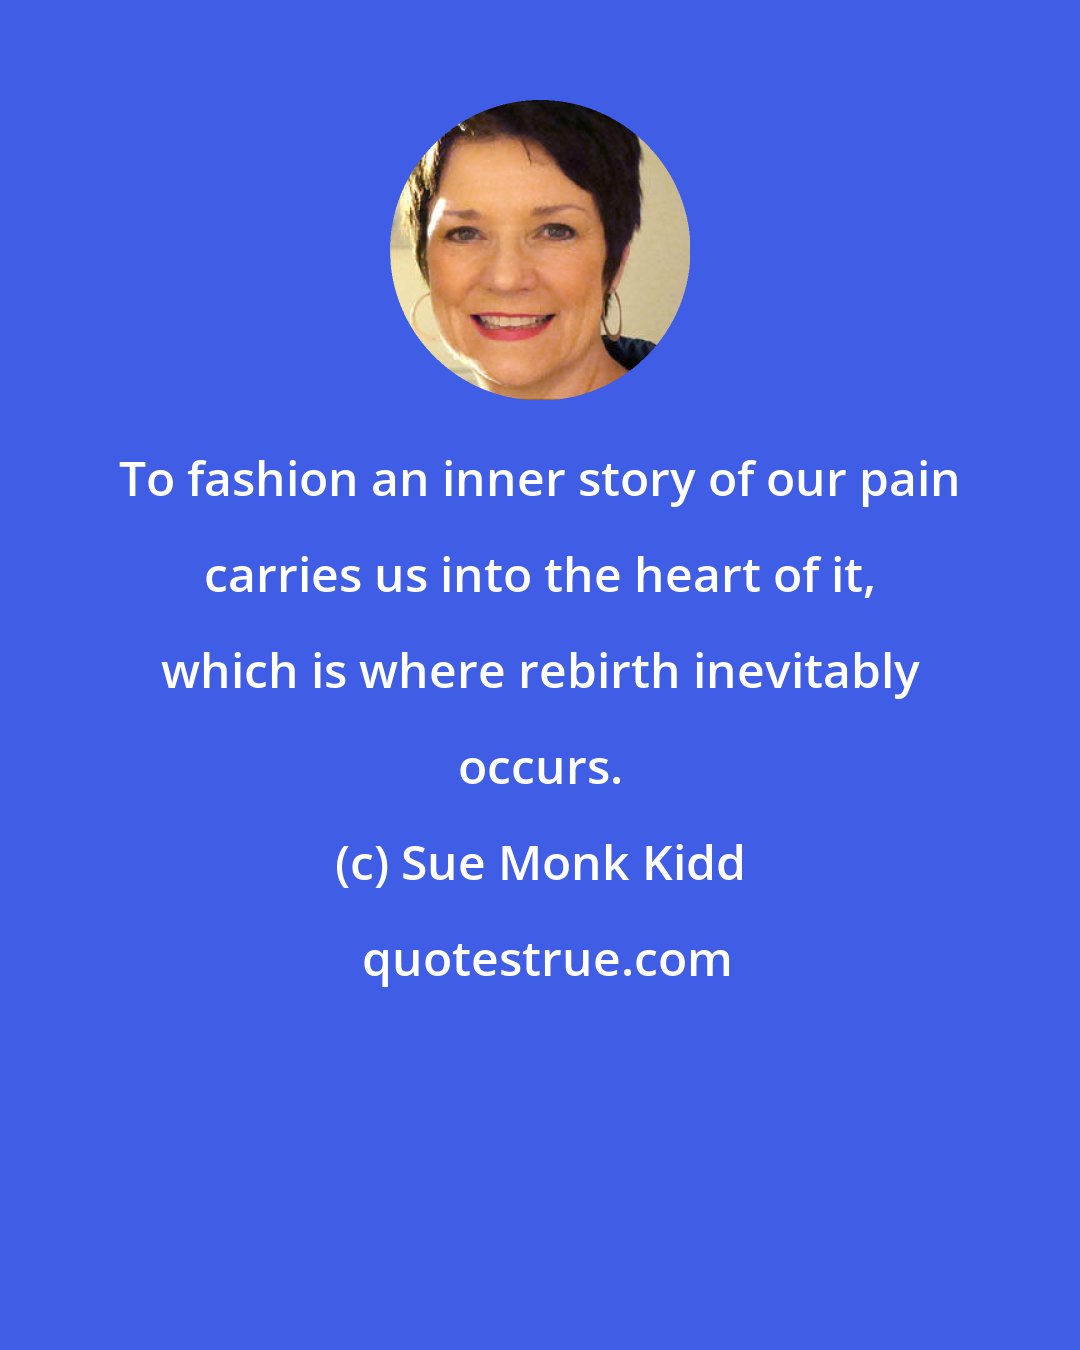 Sue Monk Kidd: To fashion an inner story of our pain carries us into the heart of it, which is where rebirth inevitably occurs.